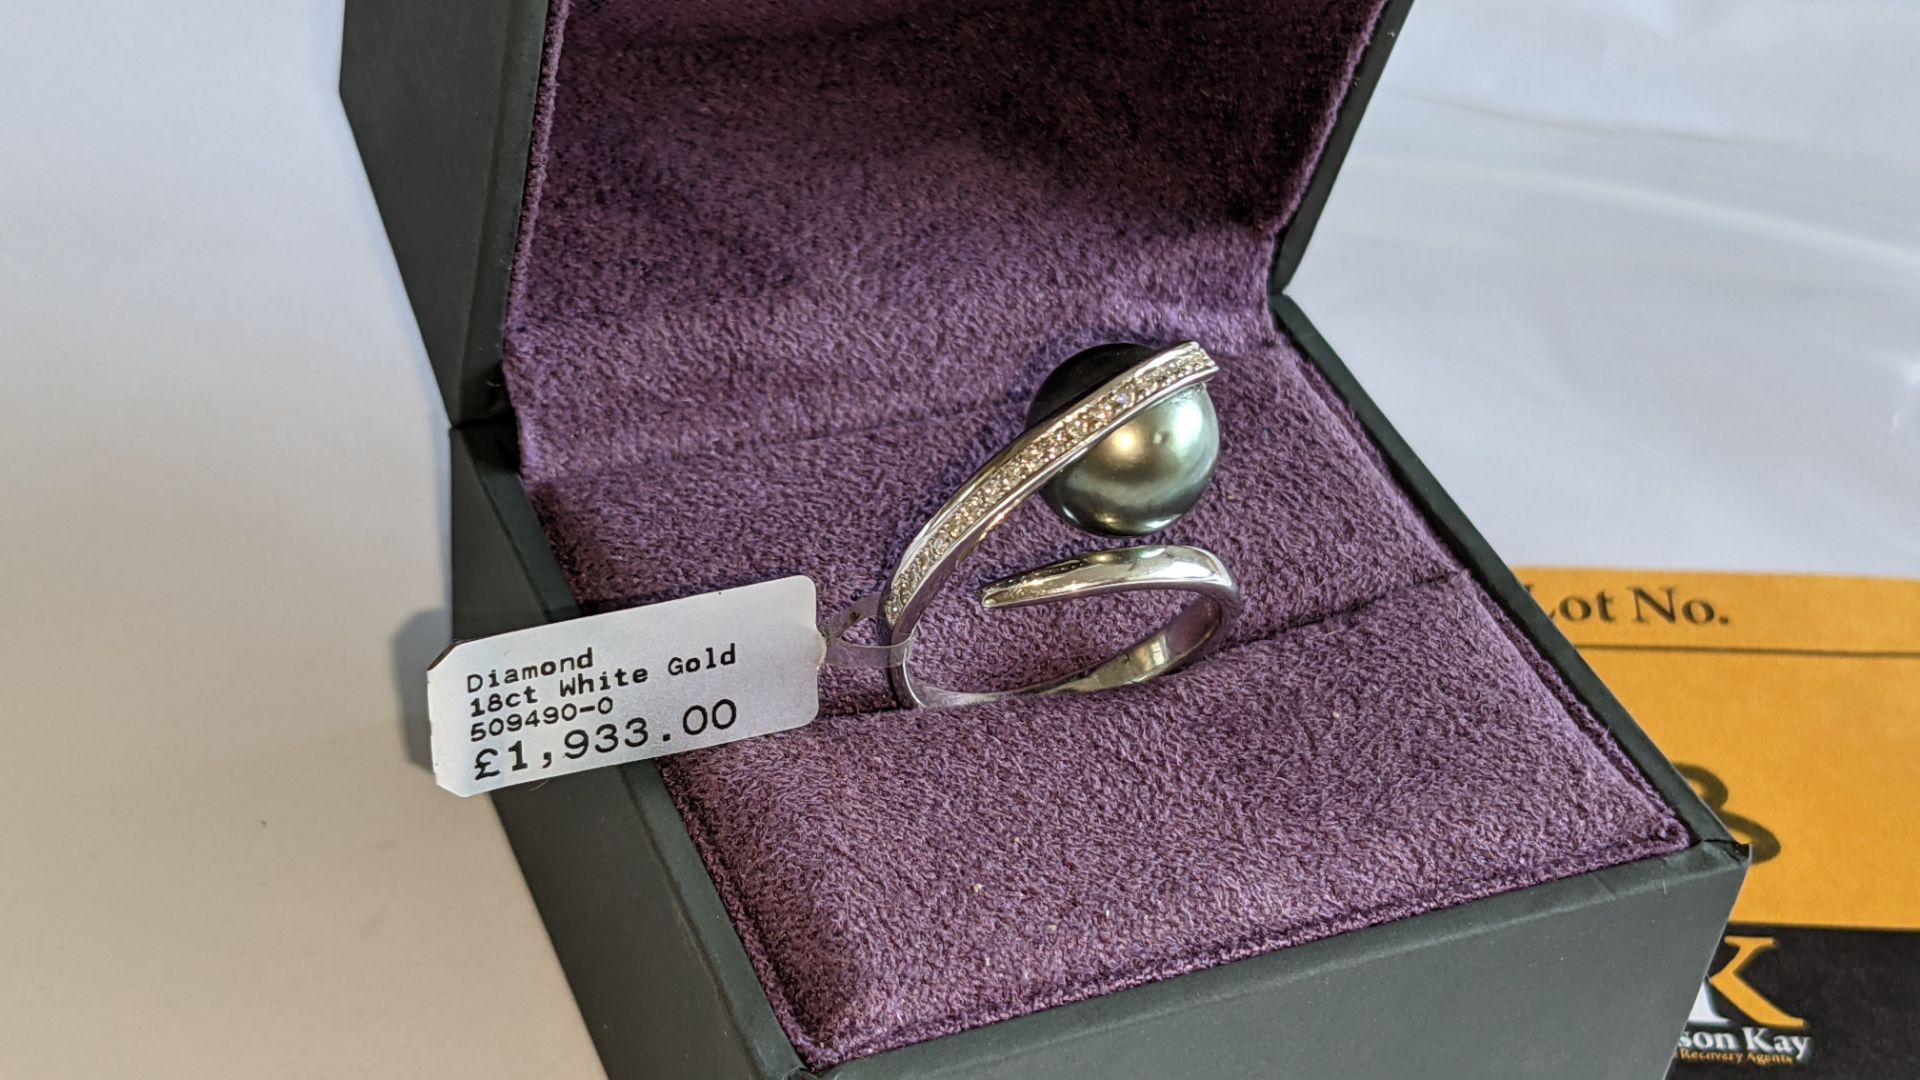 18ct white gold diamond & Tahitian pearl ring with 0.069ct of diamonds. RRP £1,933 - Image 4 of 17